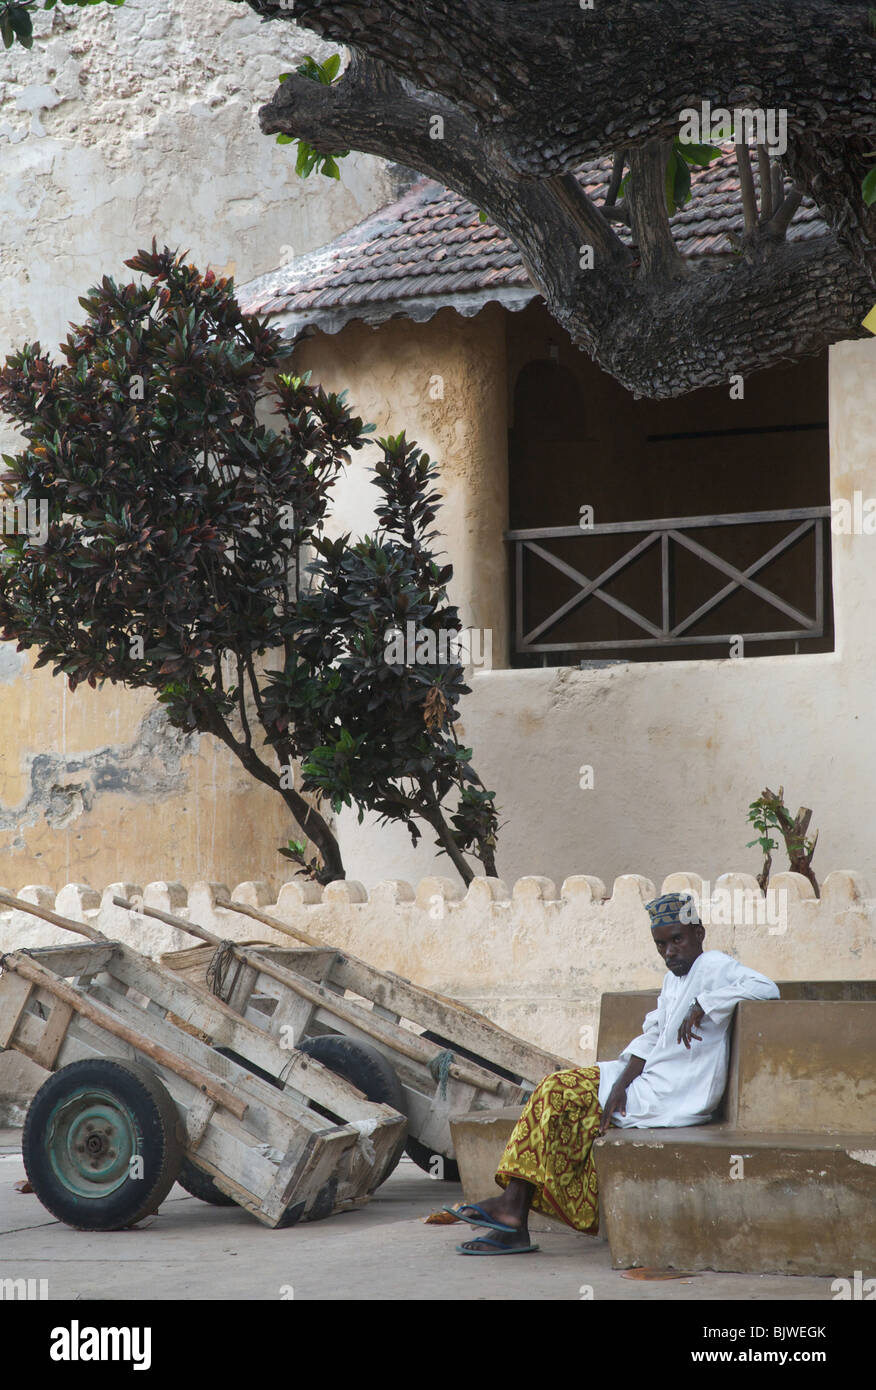 A man sits in Lamu's main square in front of the old fort, Northern Kenya, Africa Stock Photo